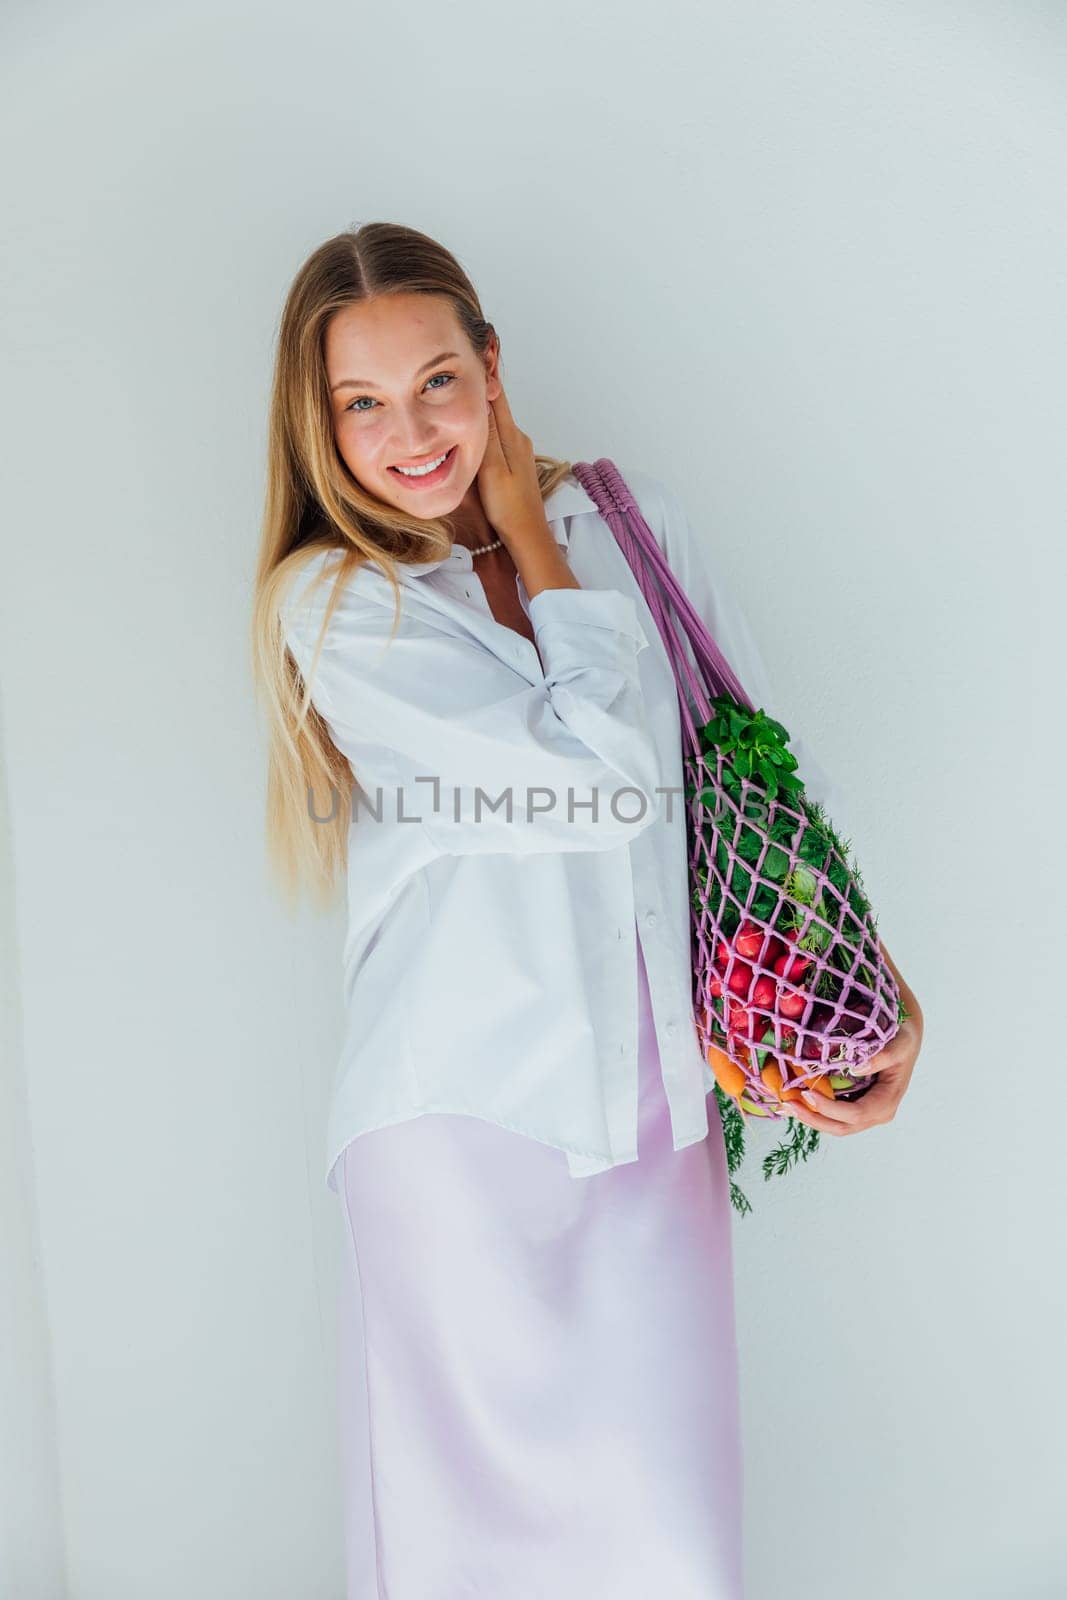 Female nutritionist holding bag with vegetables for cooking by Simakov